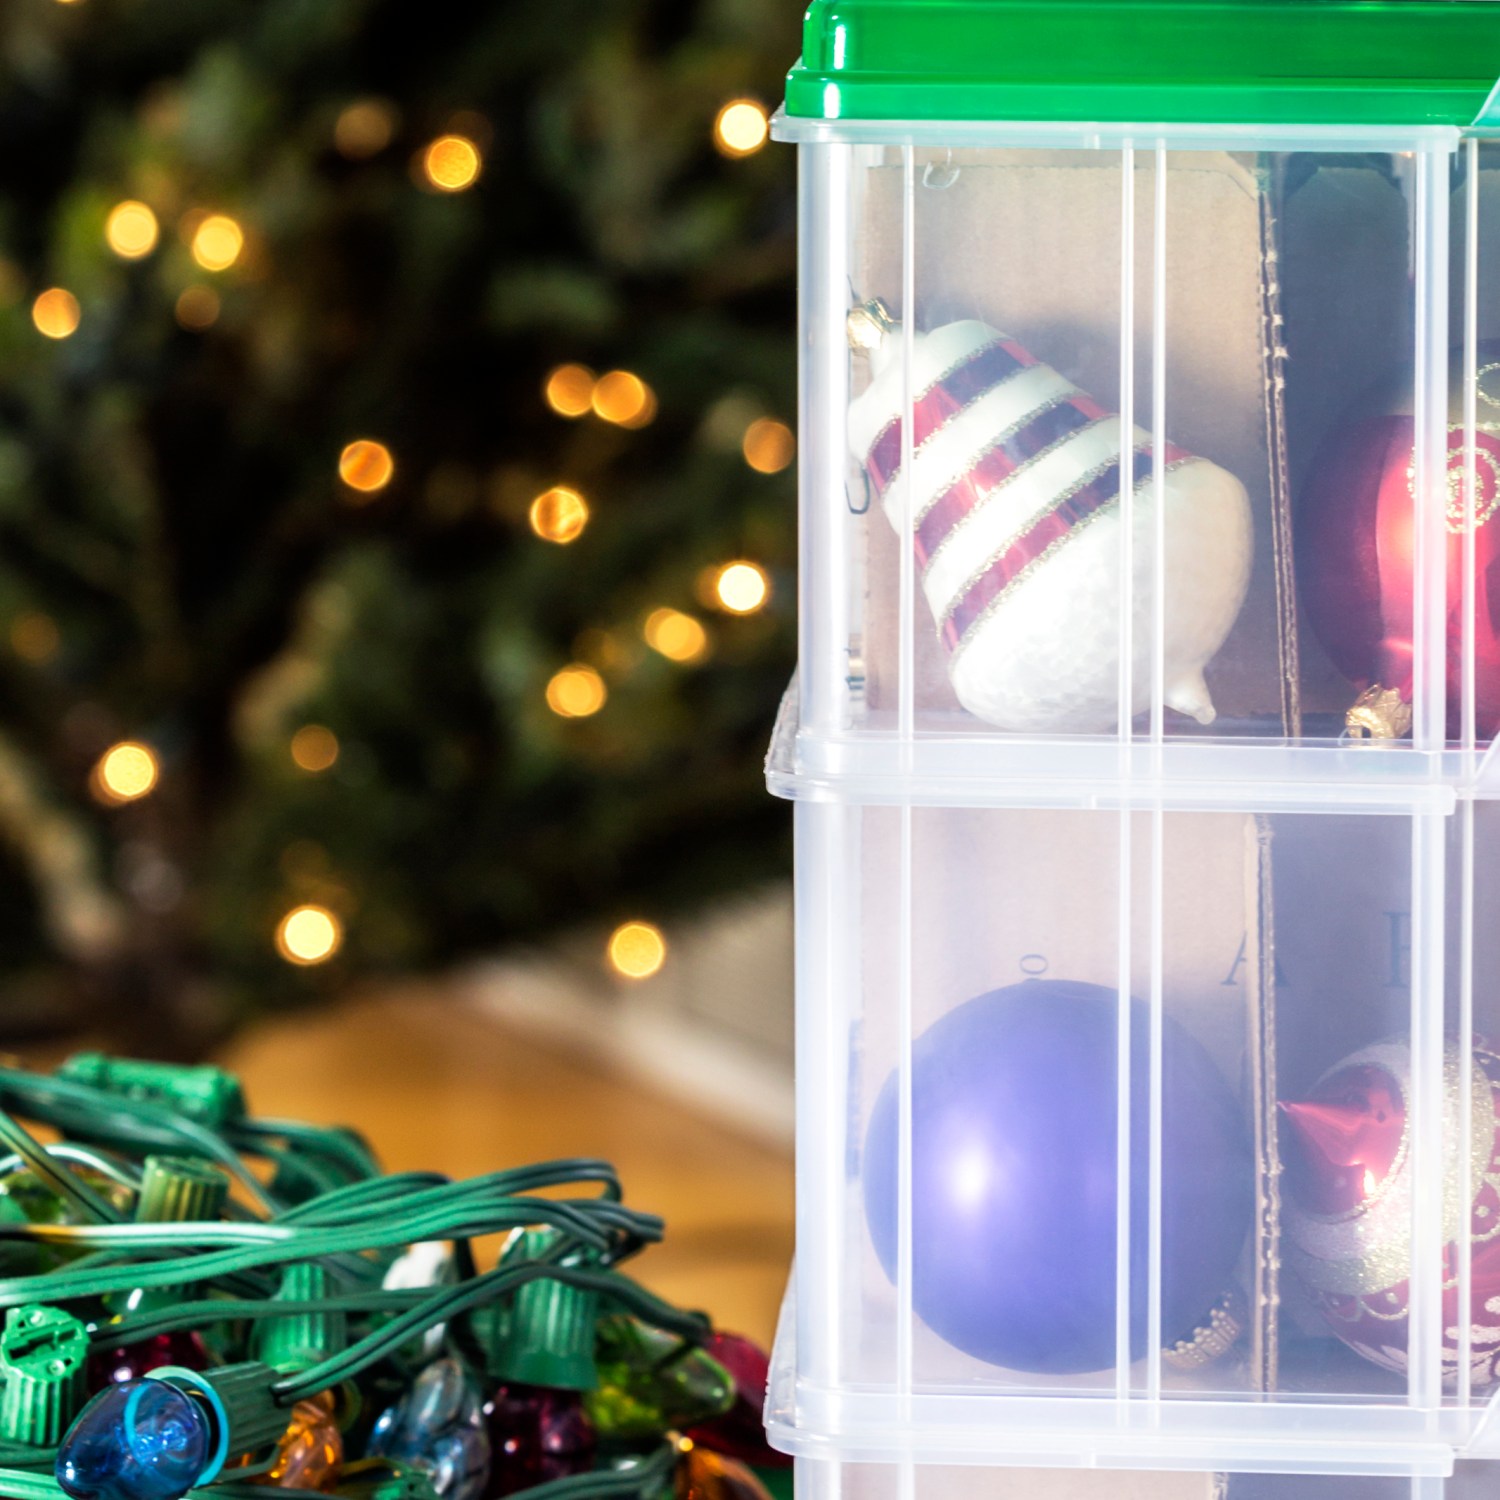 organized holiday decor lights and ornaments in clear storage bins with blurred christmas tree in background